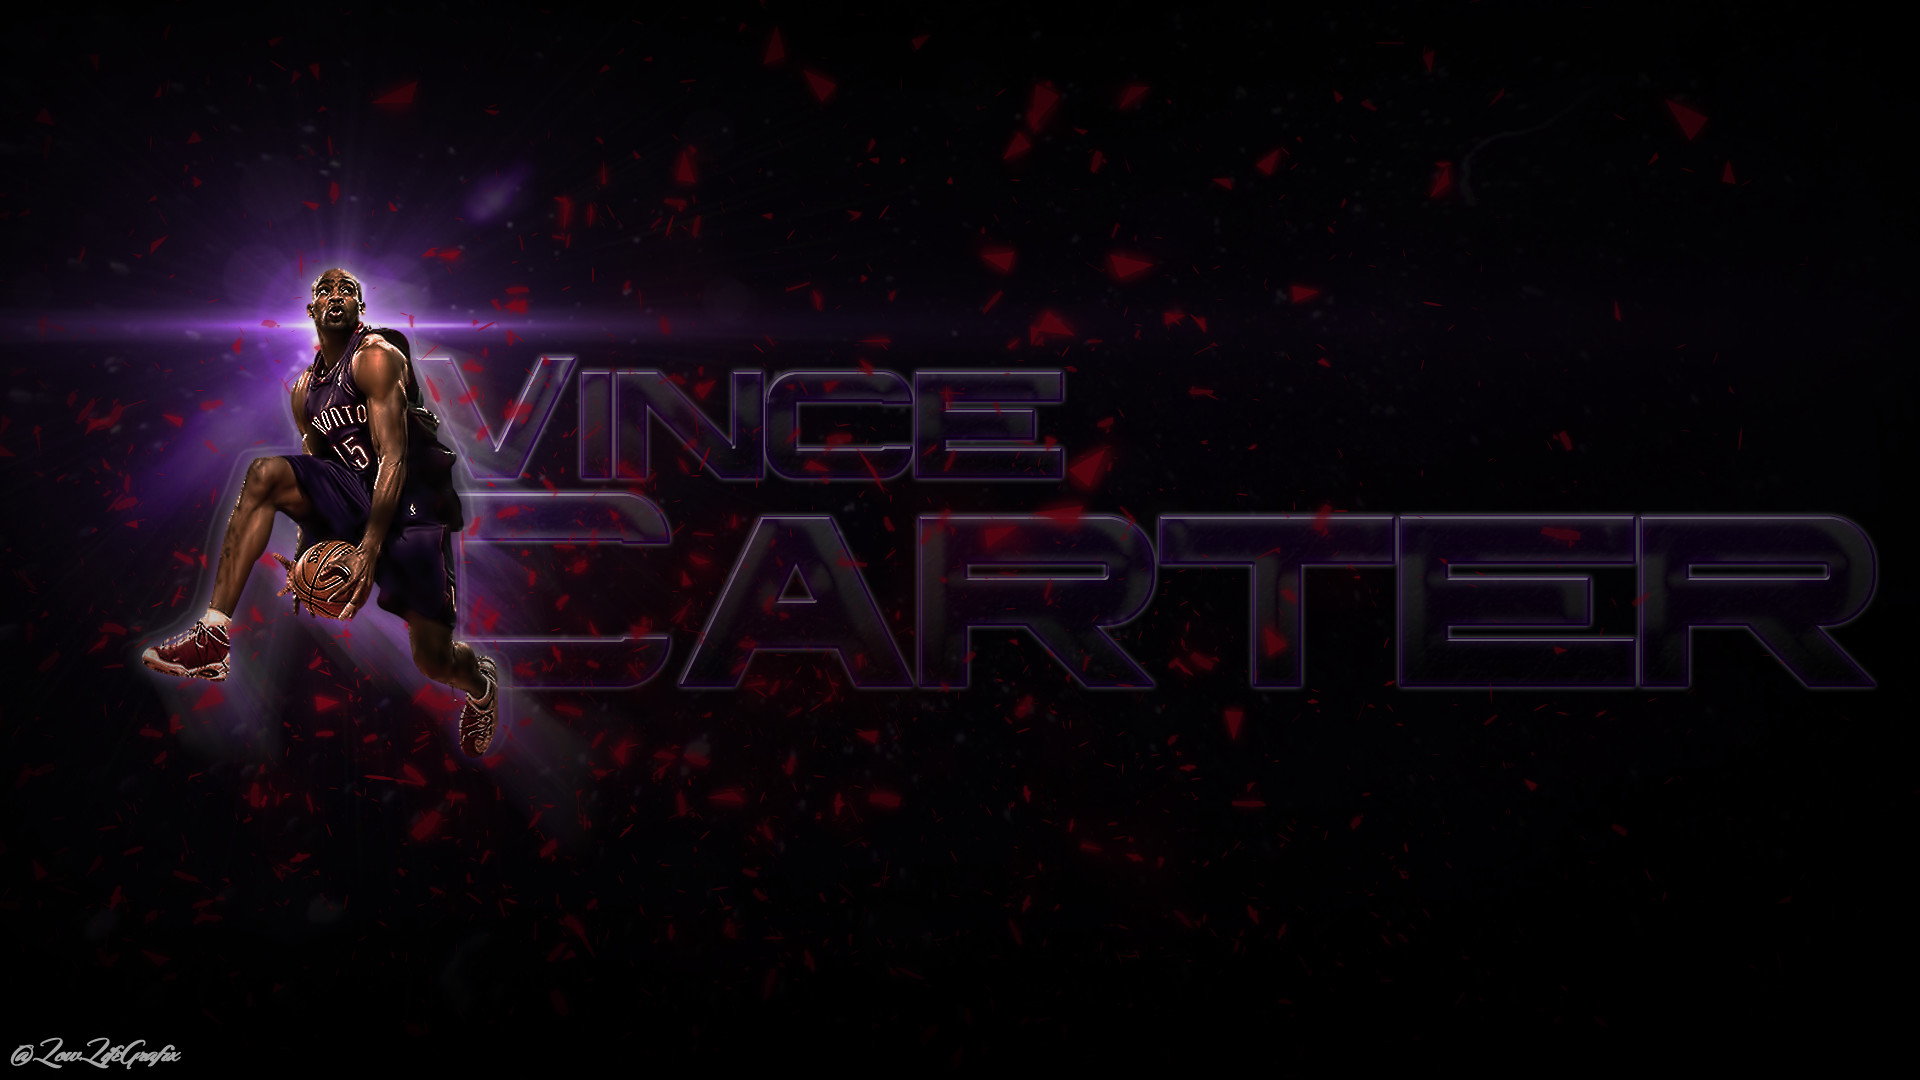 1920x1080 Vince Carter Throwback Wallpaper by Jagstownville Vince Carter Throwback  Wallpaper by Jagstownville